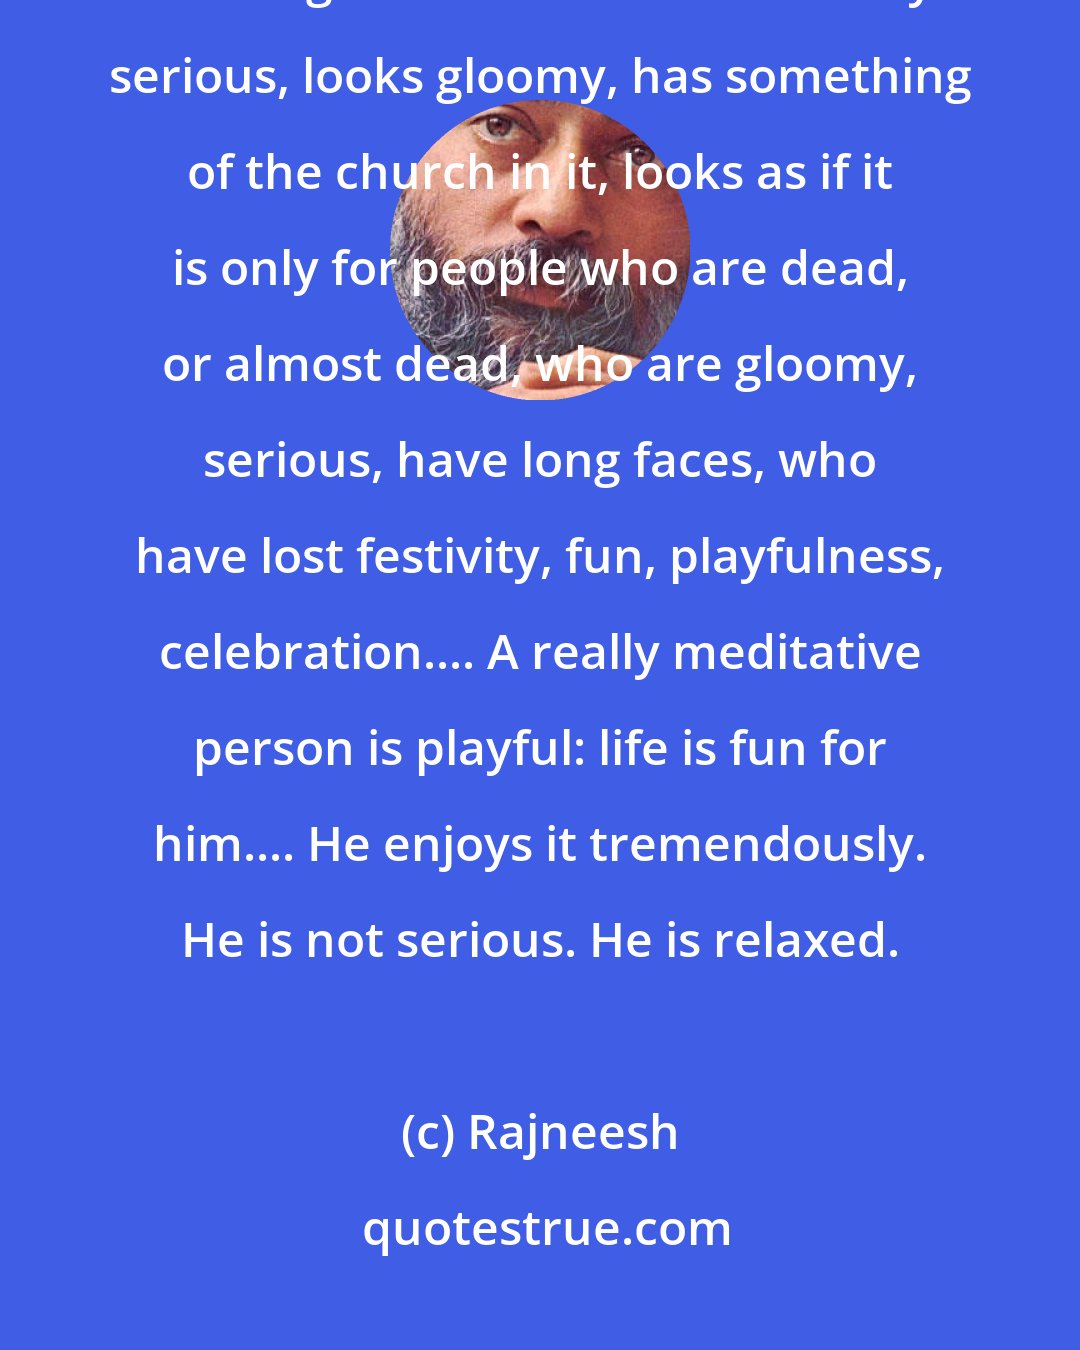 Rajneesh: Millions of people miss meditation because meditation has taken on a wrong connotation. It looks very serious, looks gloomy, has something of the church in it, looks as if it is only for people who are dead, or almost dead, who are gloomy, serious, have long faces, who have lost festivity, fun, playfulness, celebration.... A really meditative person is playful: life is fun for him.... He enjoys it tremendously. He is not serious. He is relaxed.